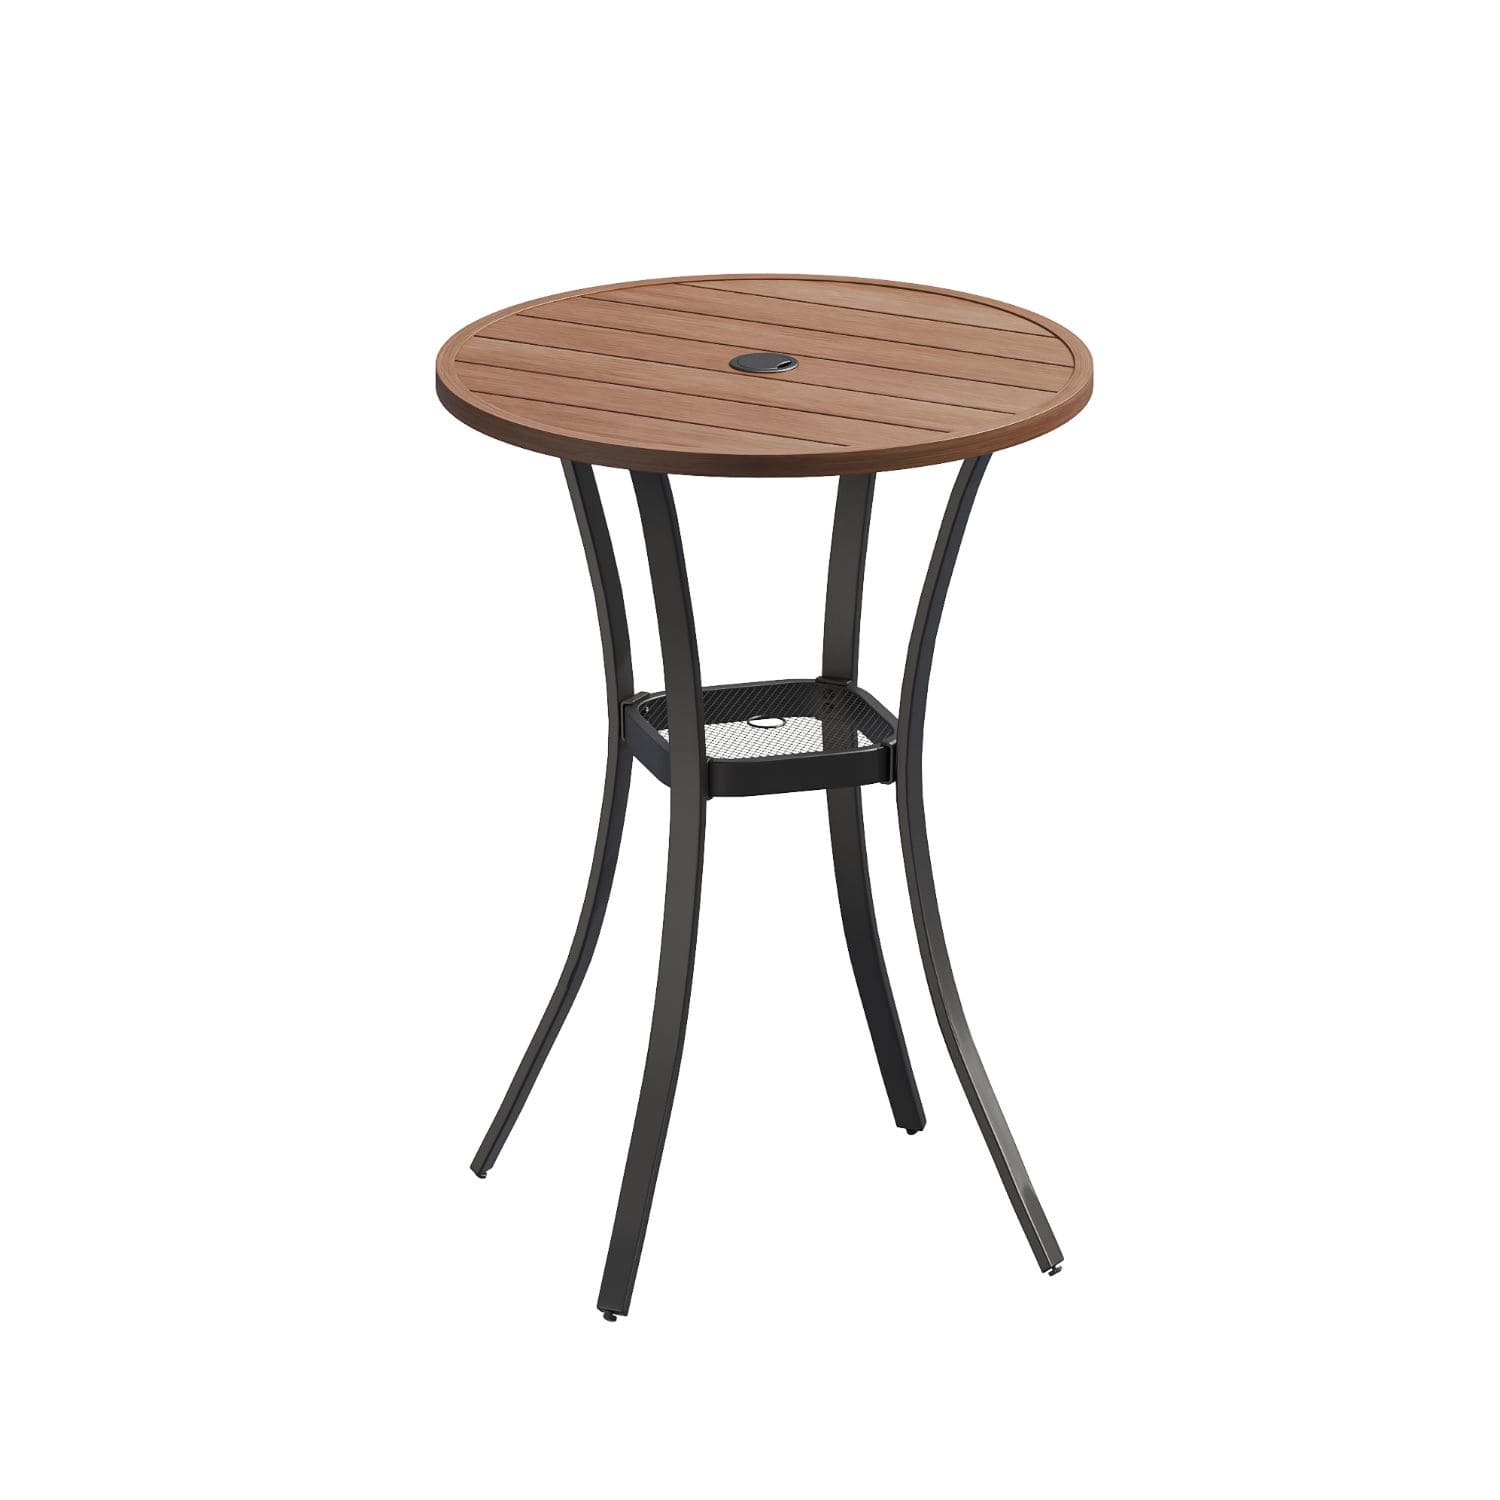 Vicllax Outdoor 28" Round Bar Table with Umbrella Hole and Storage Shelf